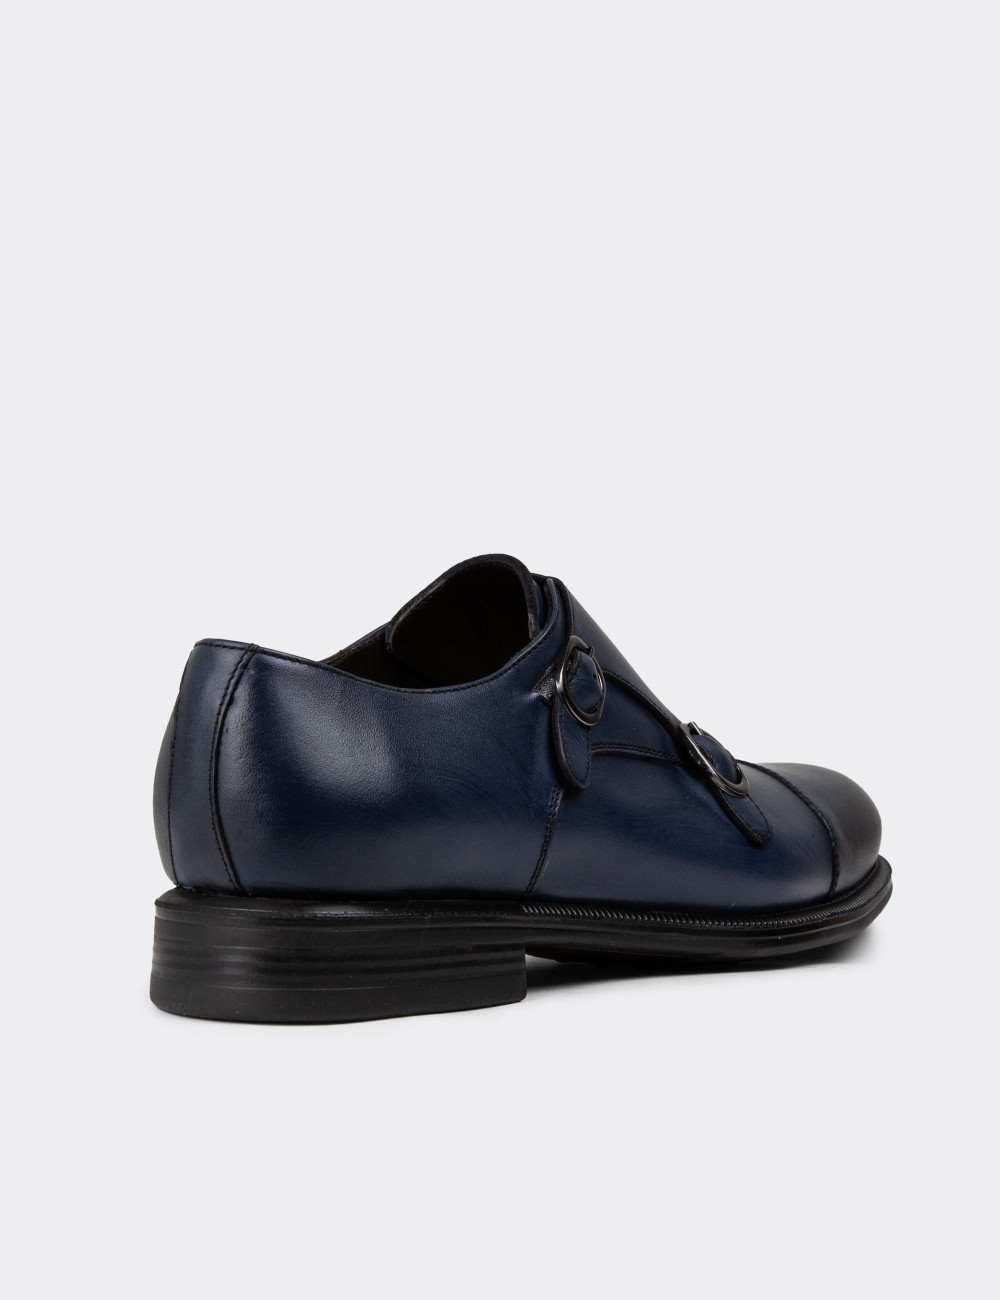 Navy Blue Leather Double Monk-Strap Classic Shoes - 01838MLCVC01